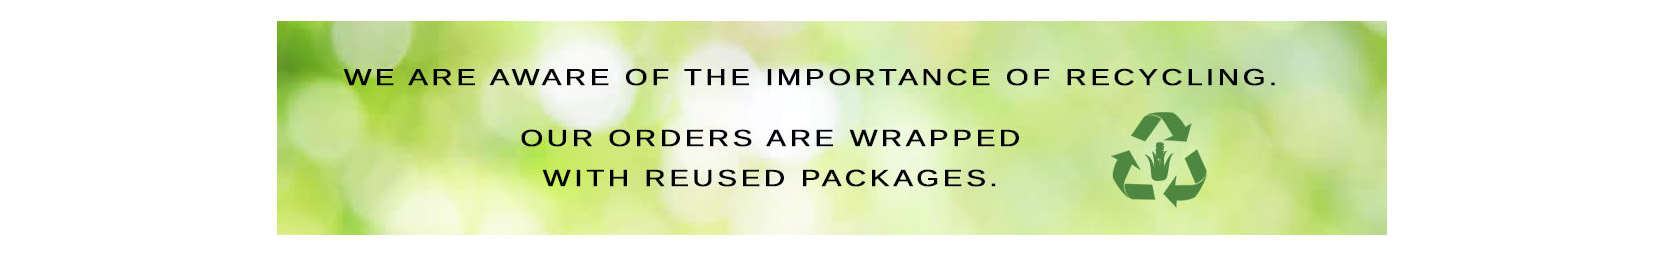 Our orders are wrapped with reused packages.